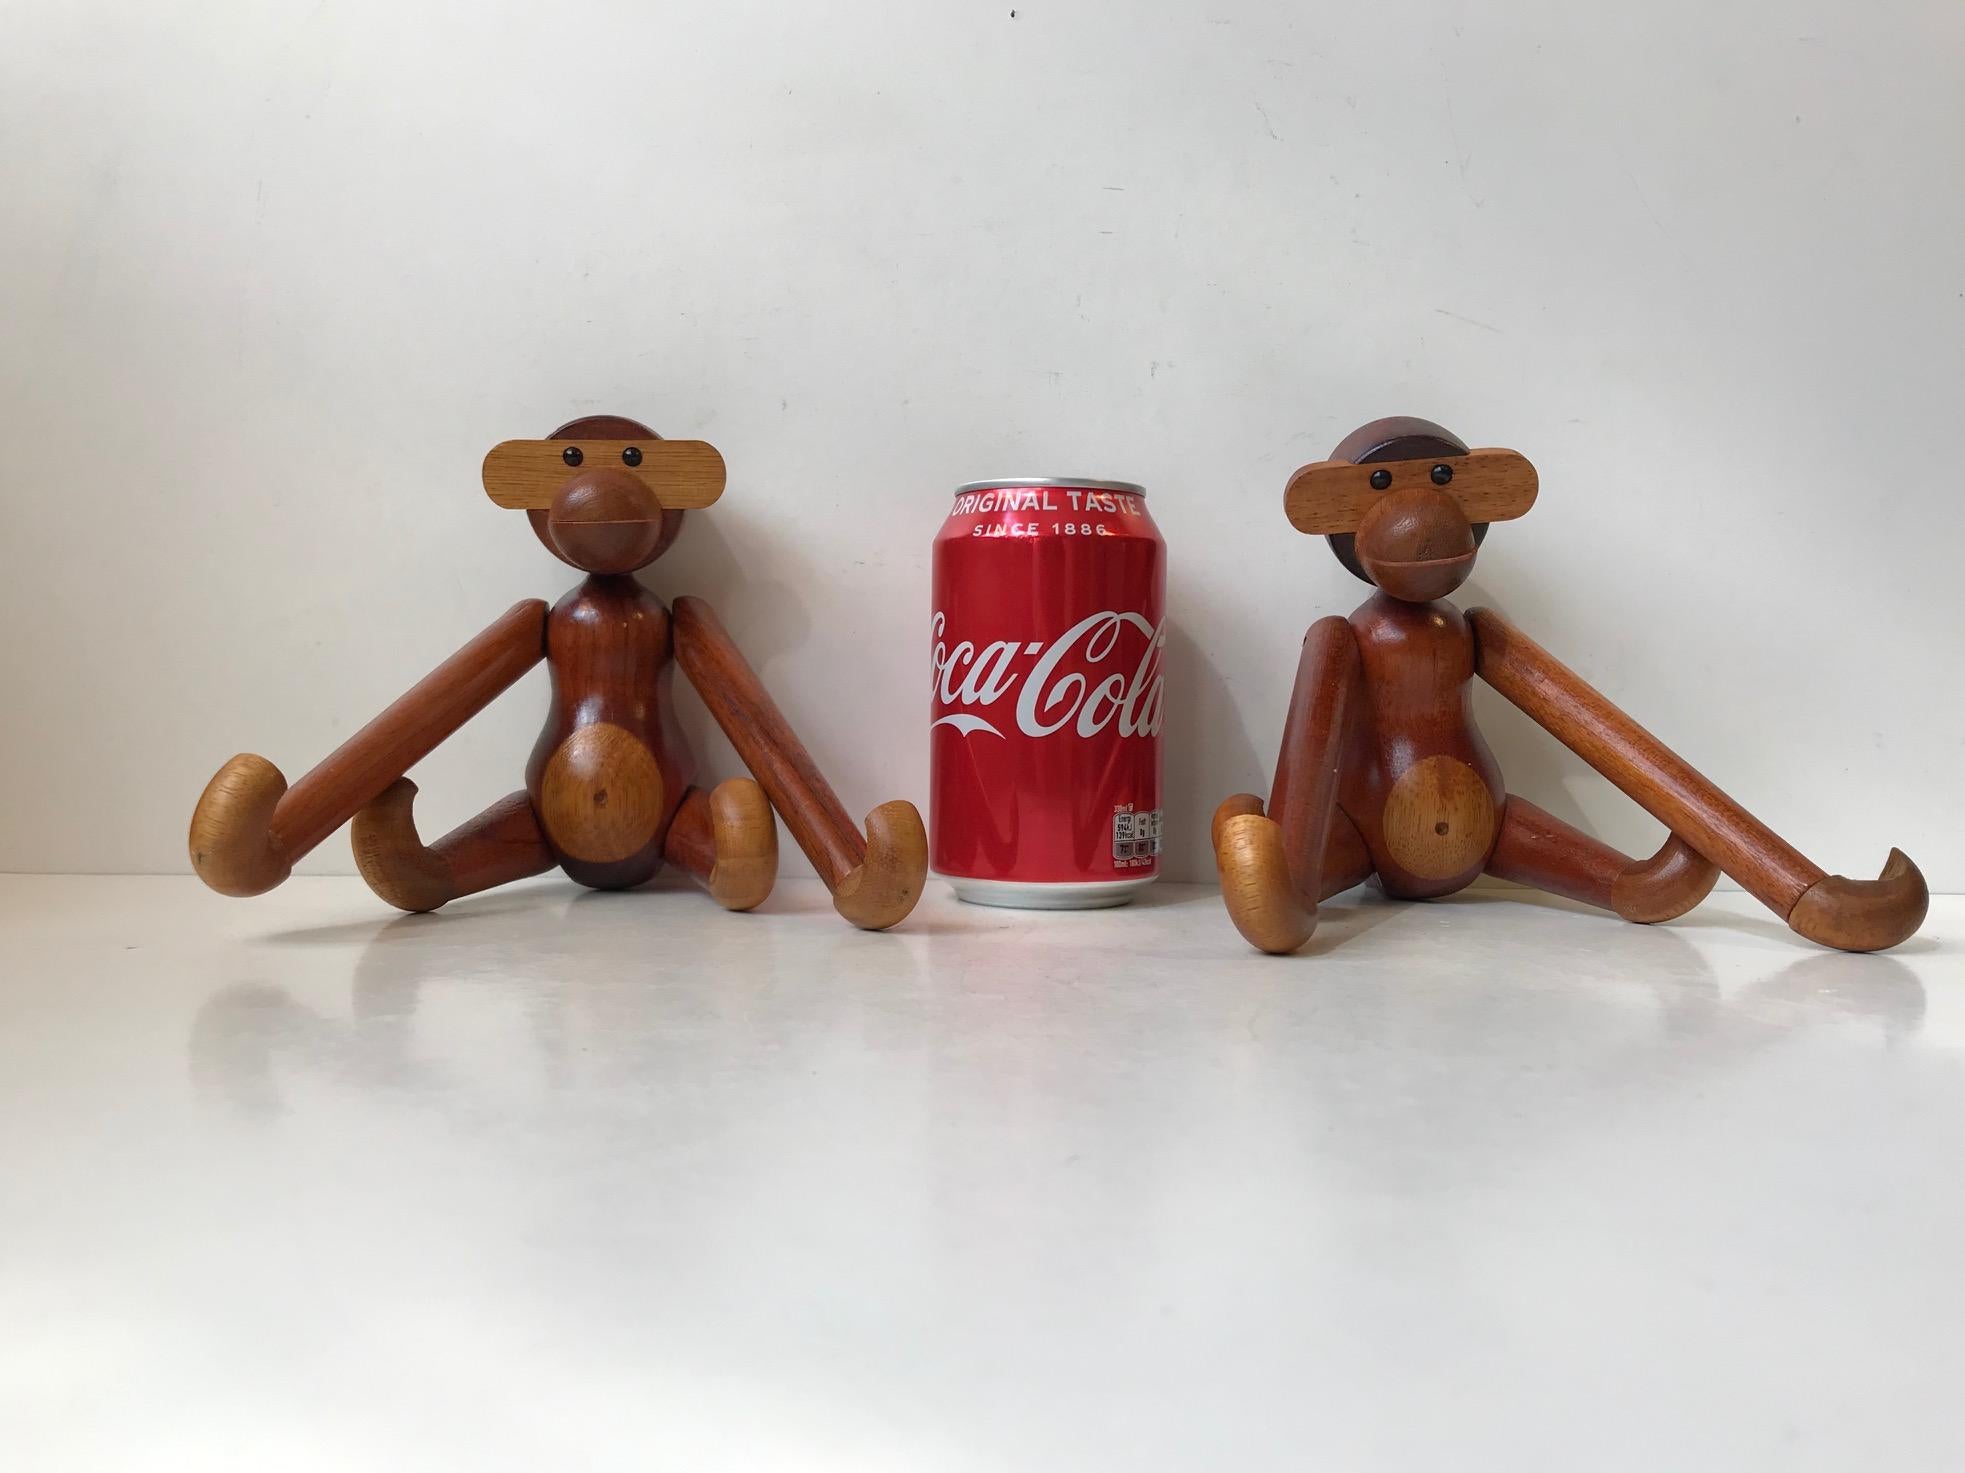 Set of two wooden monkeys designed by Kay Bojesen. Made of solid teak and limba wood. They features articulated limbs and movable heads The Kay Bojesen monkey has transformed kids rooms into jungles and sparked dreams of far-away places since 1951.